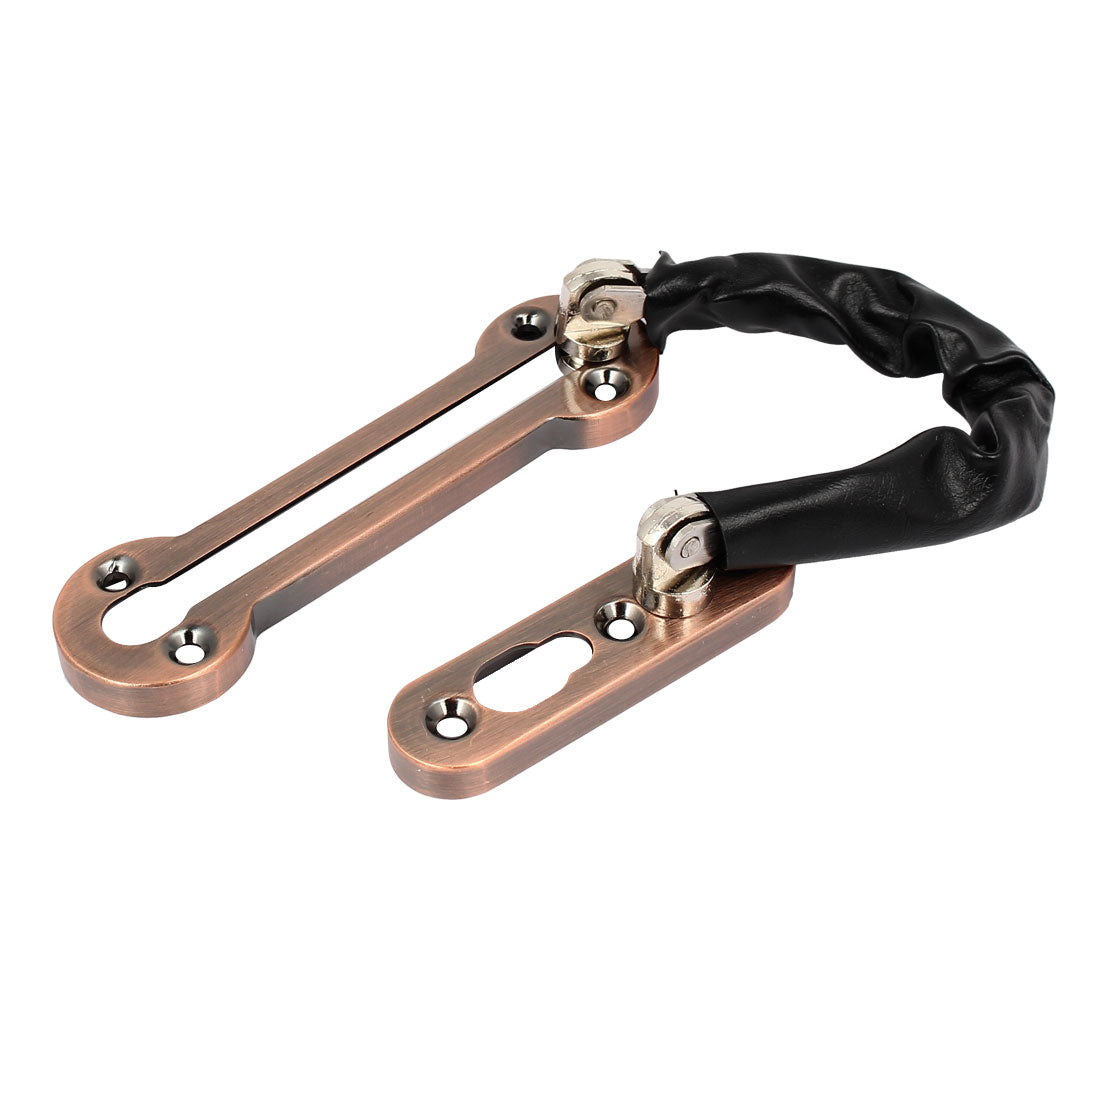 uxcell Uxcell Home Door Slide Bolt Chain Security Lock Guard Copper Tone 37cm 15-inch Length